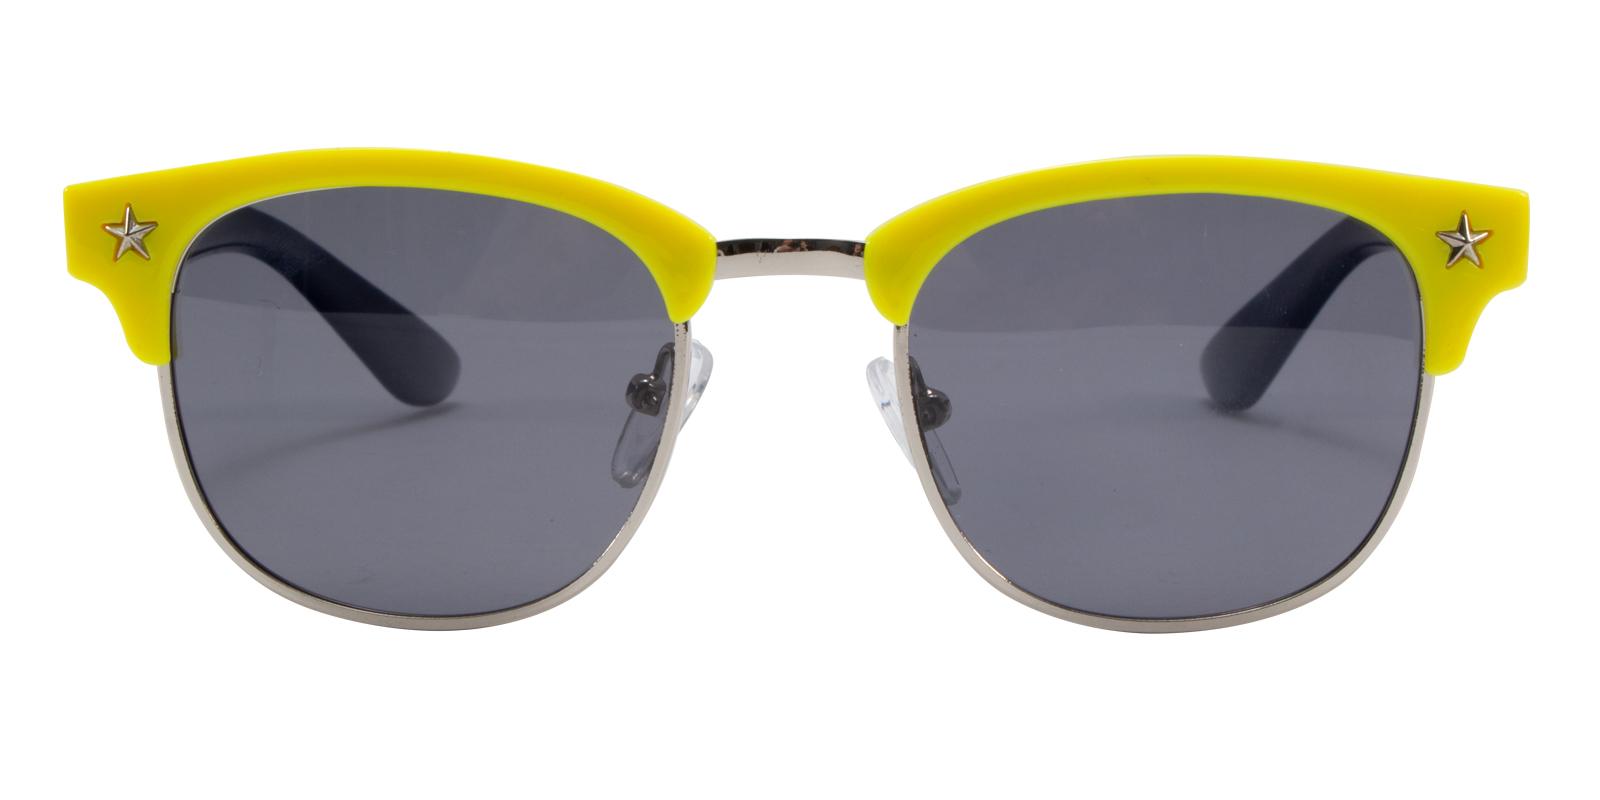 Shimmer Yellow TR NosePads , Sunglasses Frames from ABBE Glasses